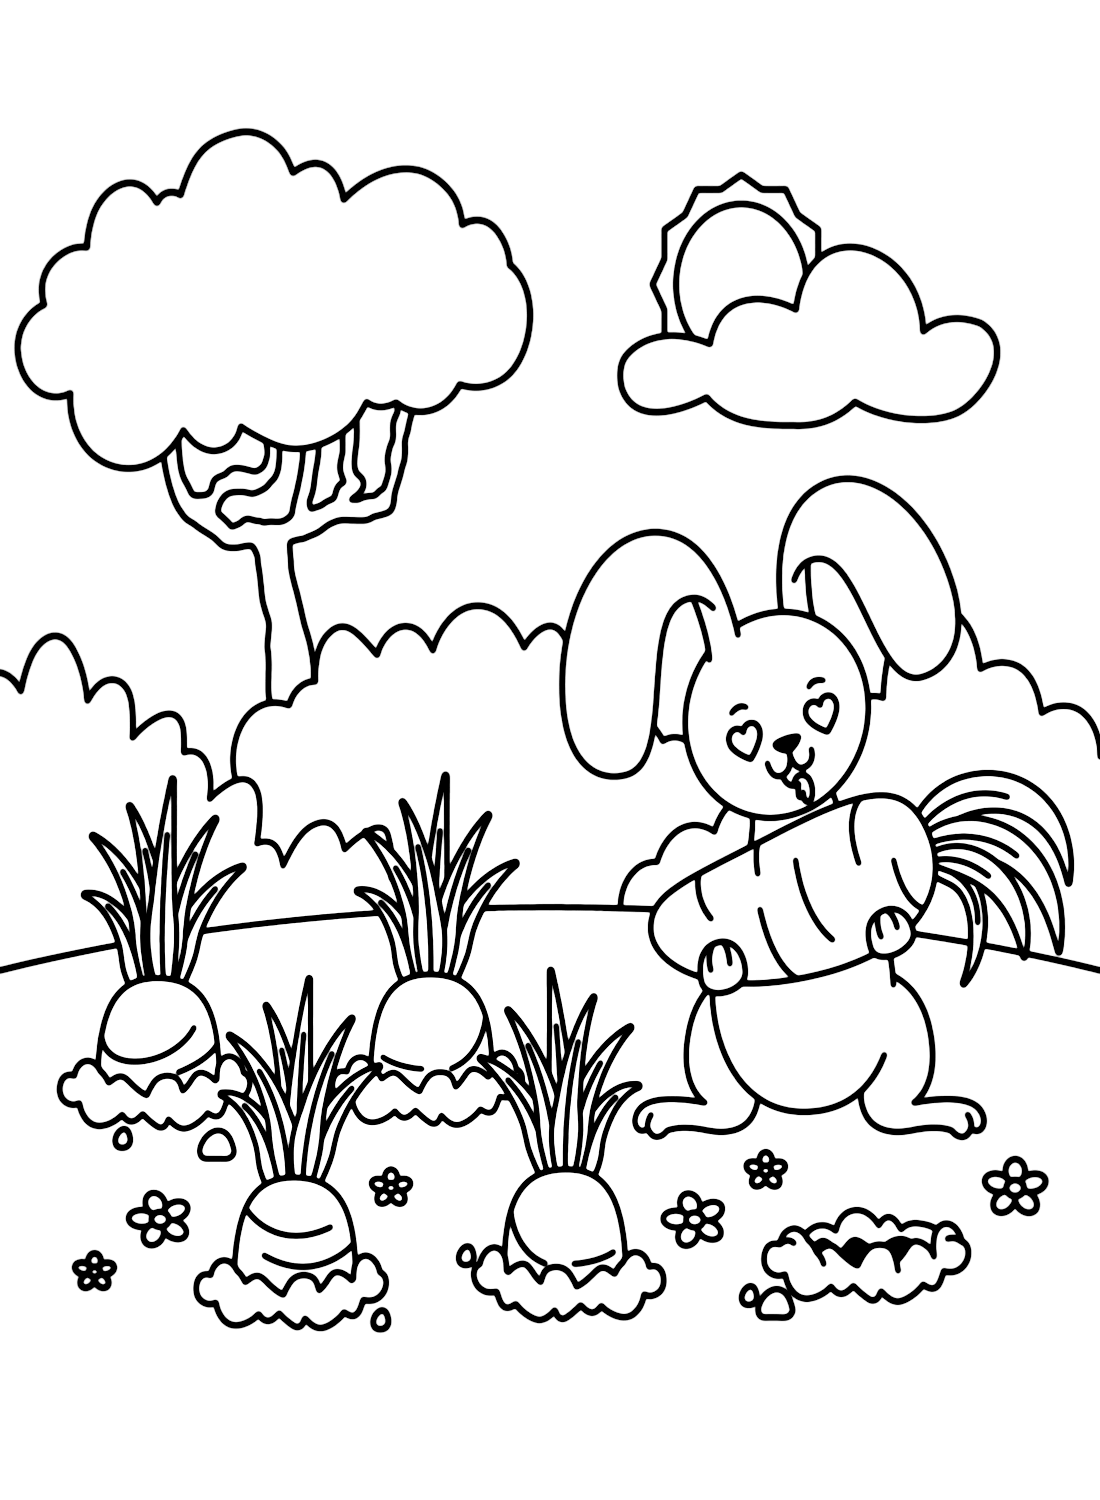 Carrot Coloring Pages PDF